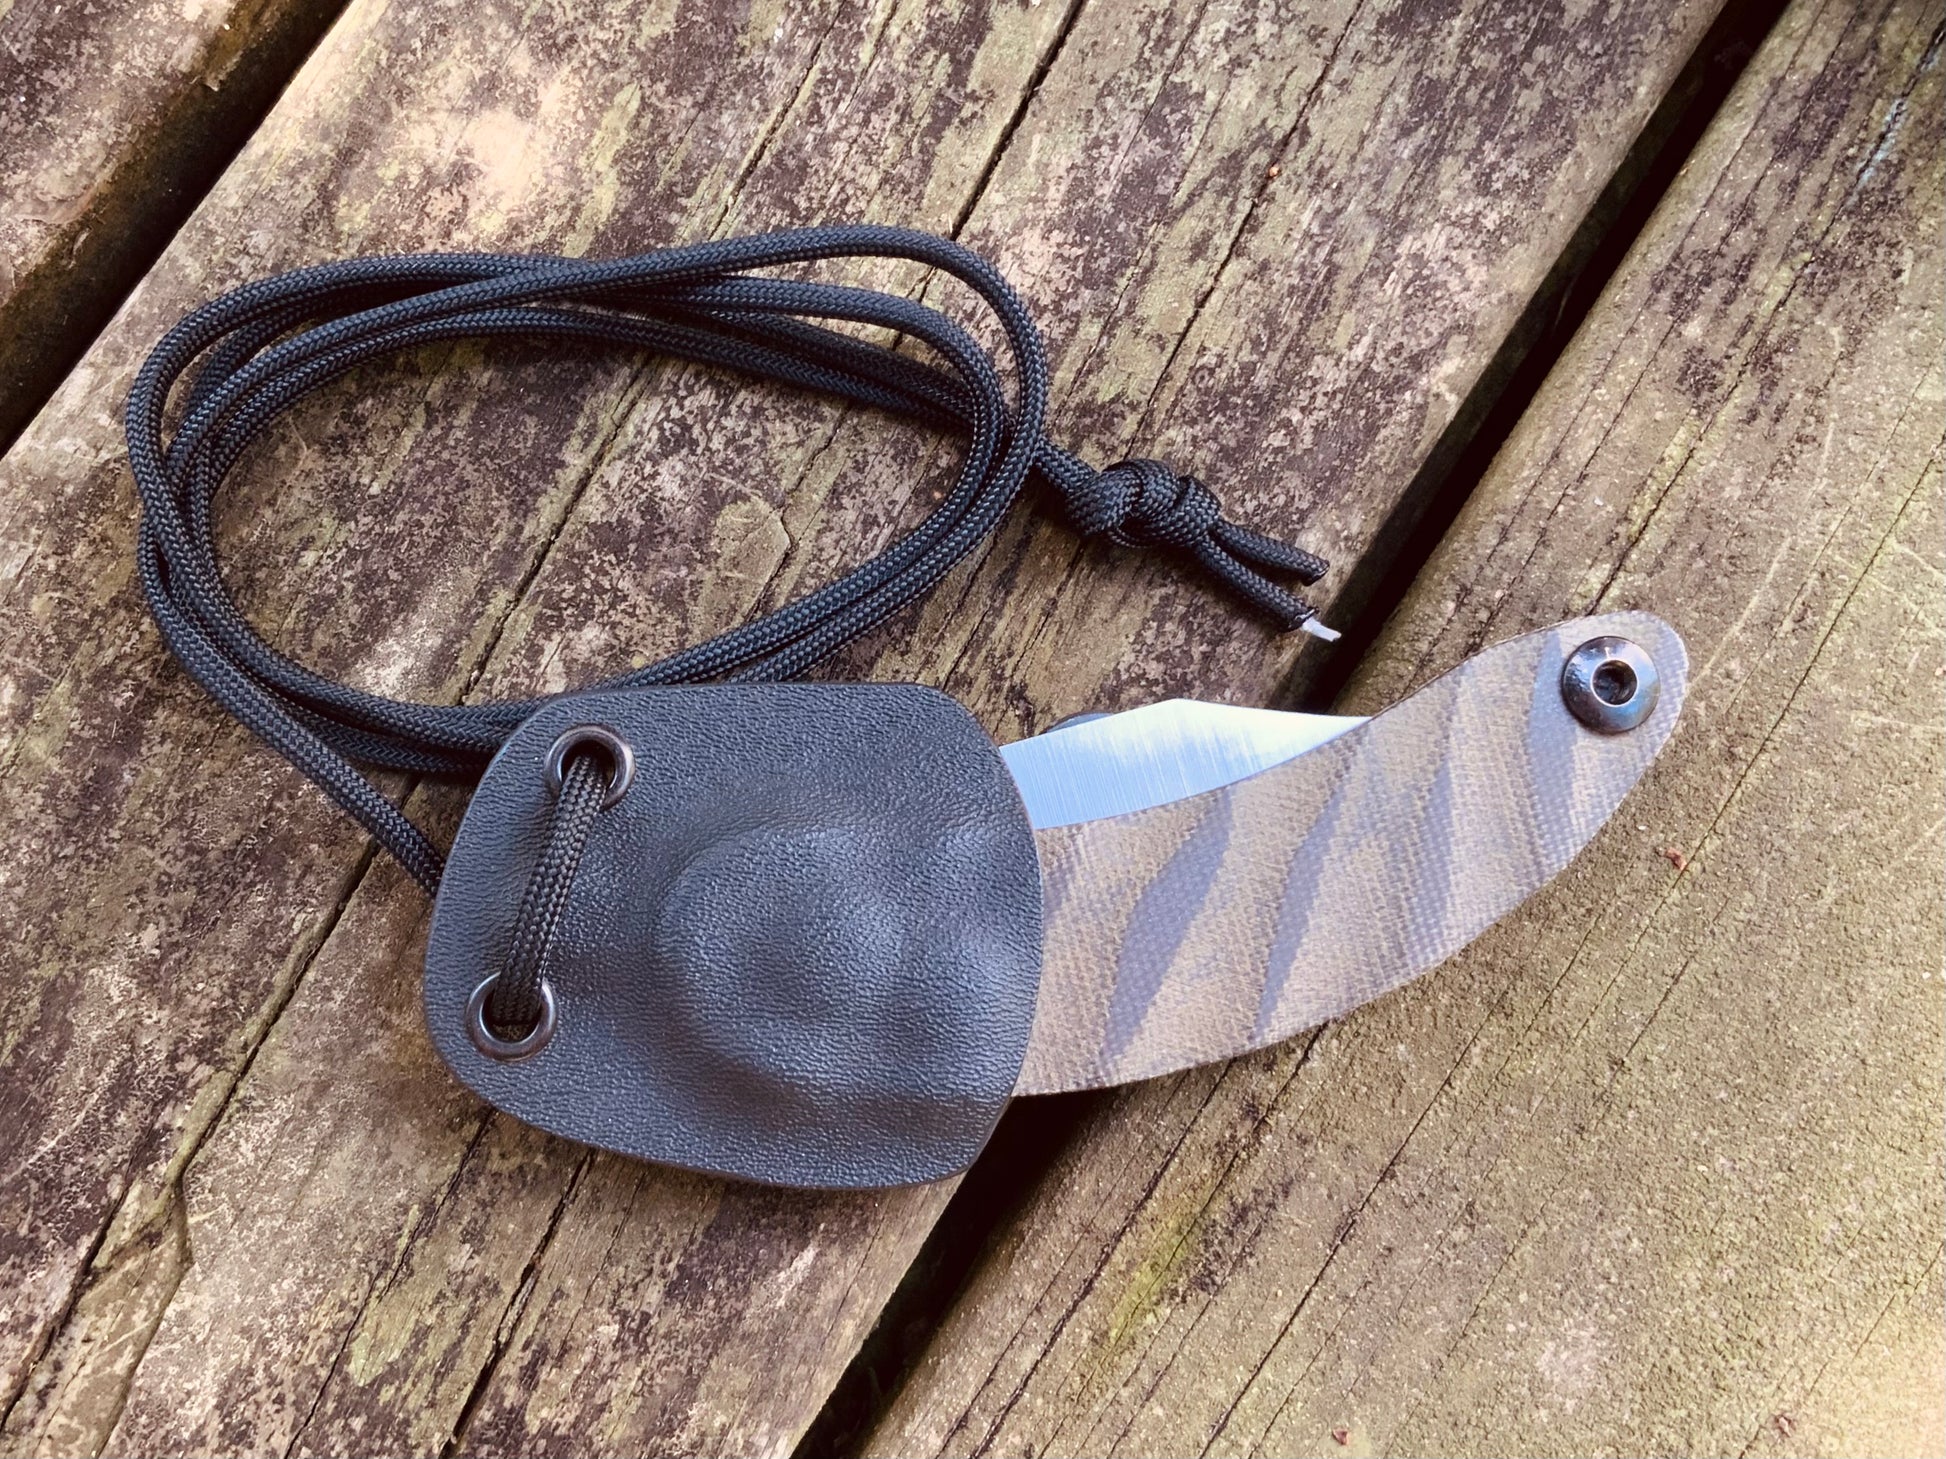 Bushcraft Neck Knife shown in Sheath with cord